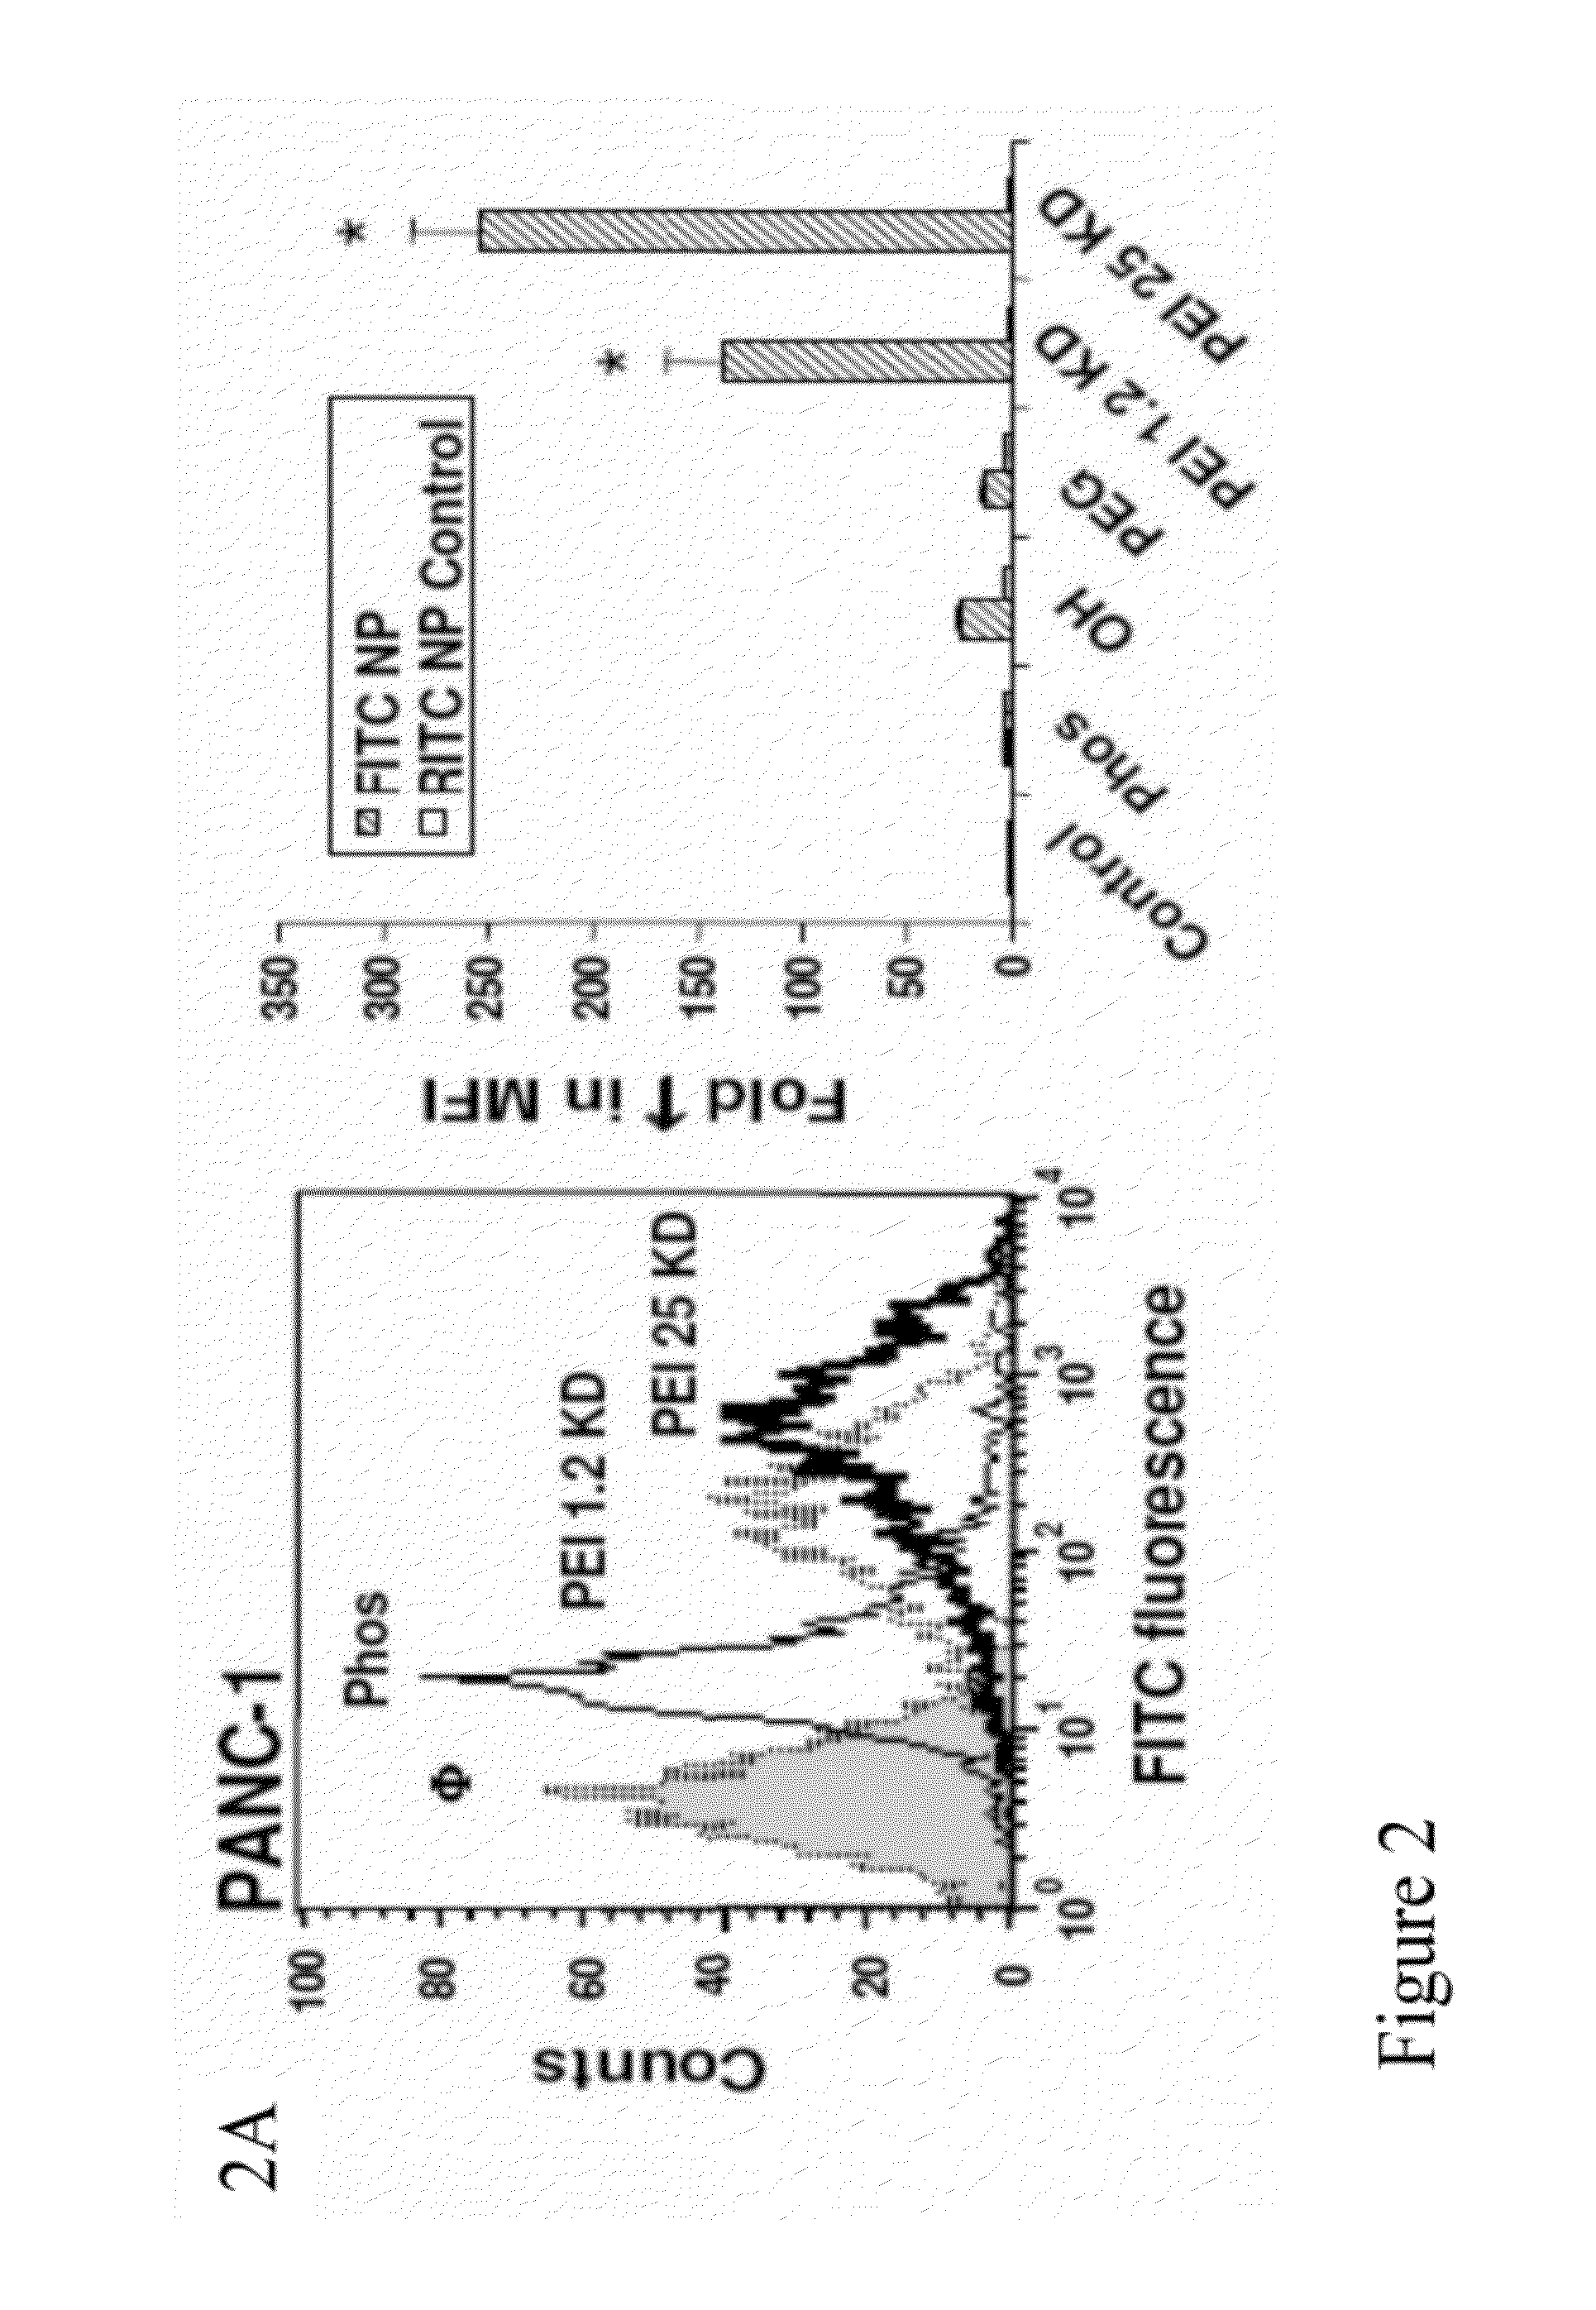 Cationic polymer coated mesoporous silica nanoparticles and uses thereof